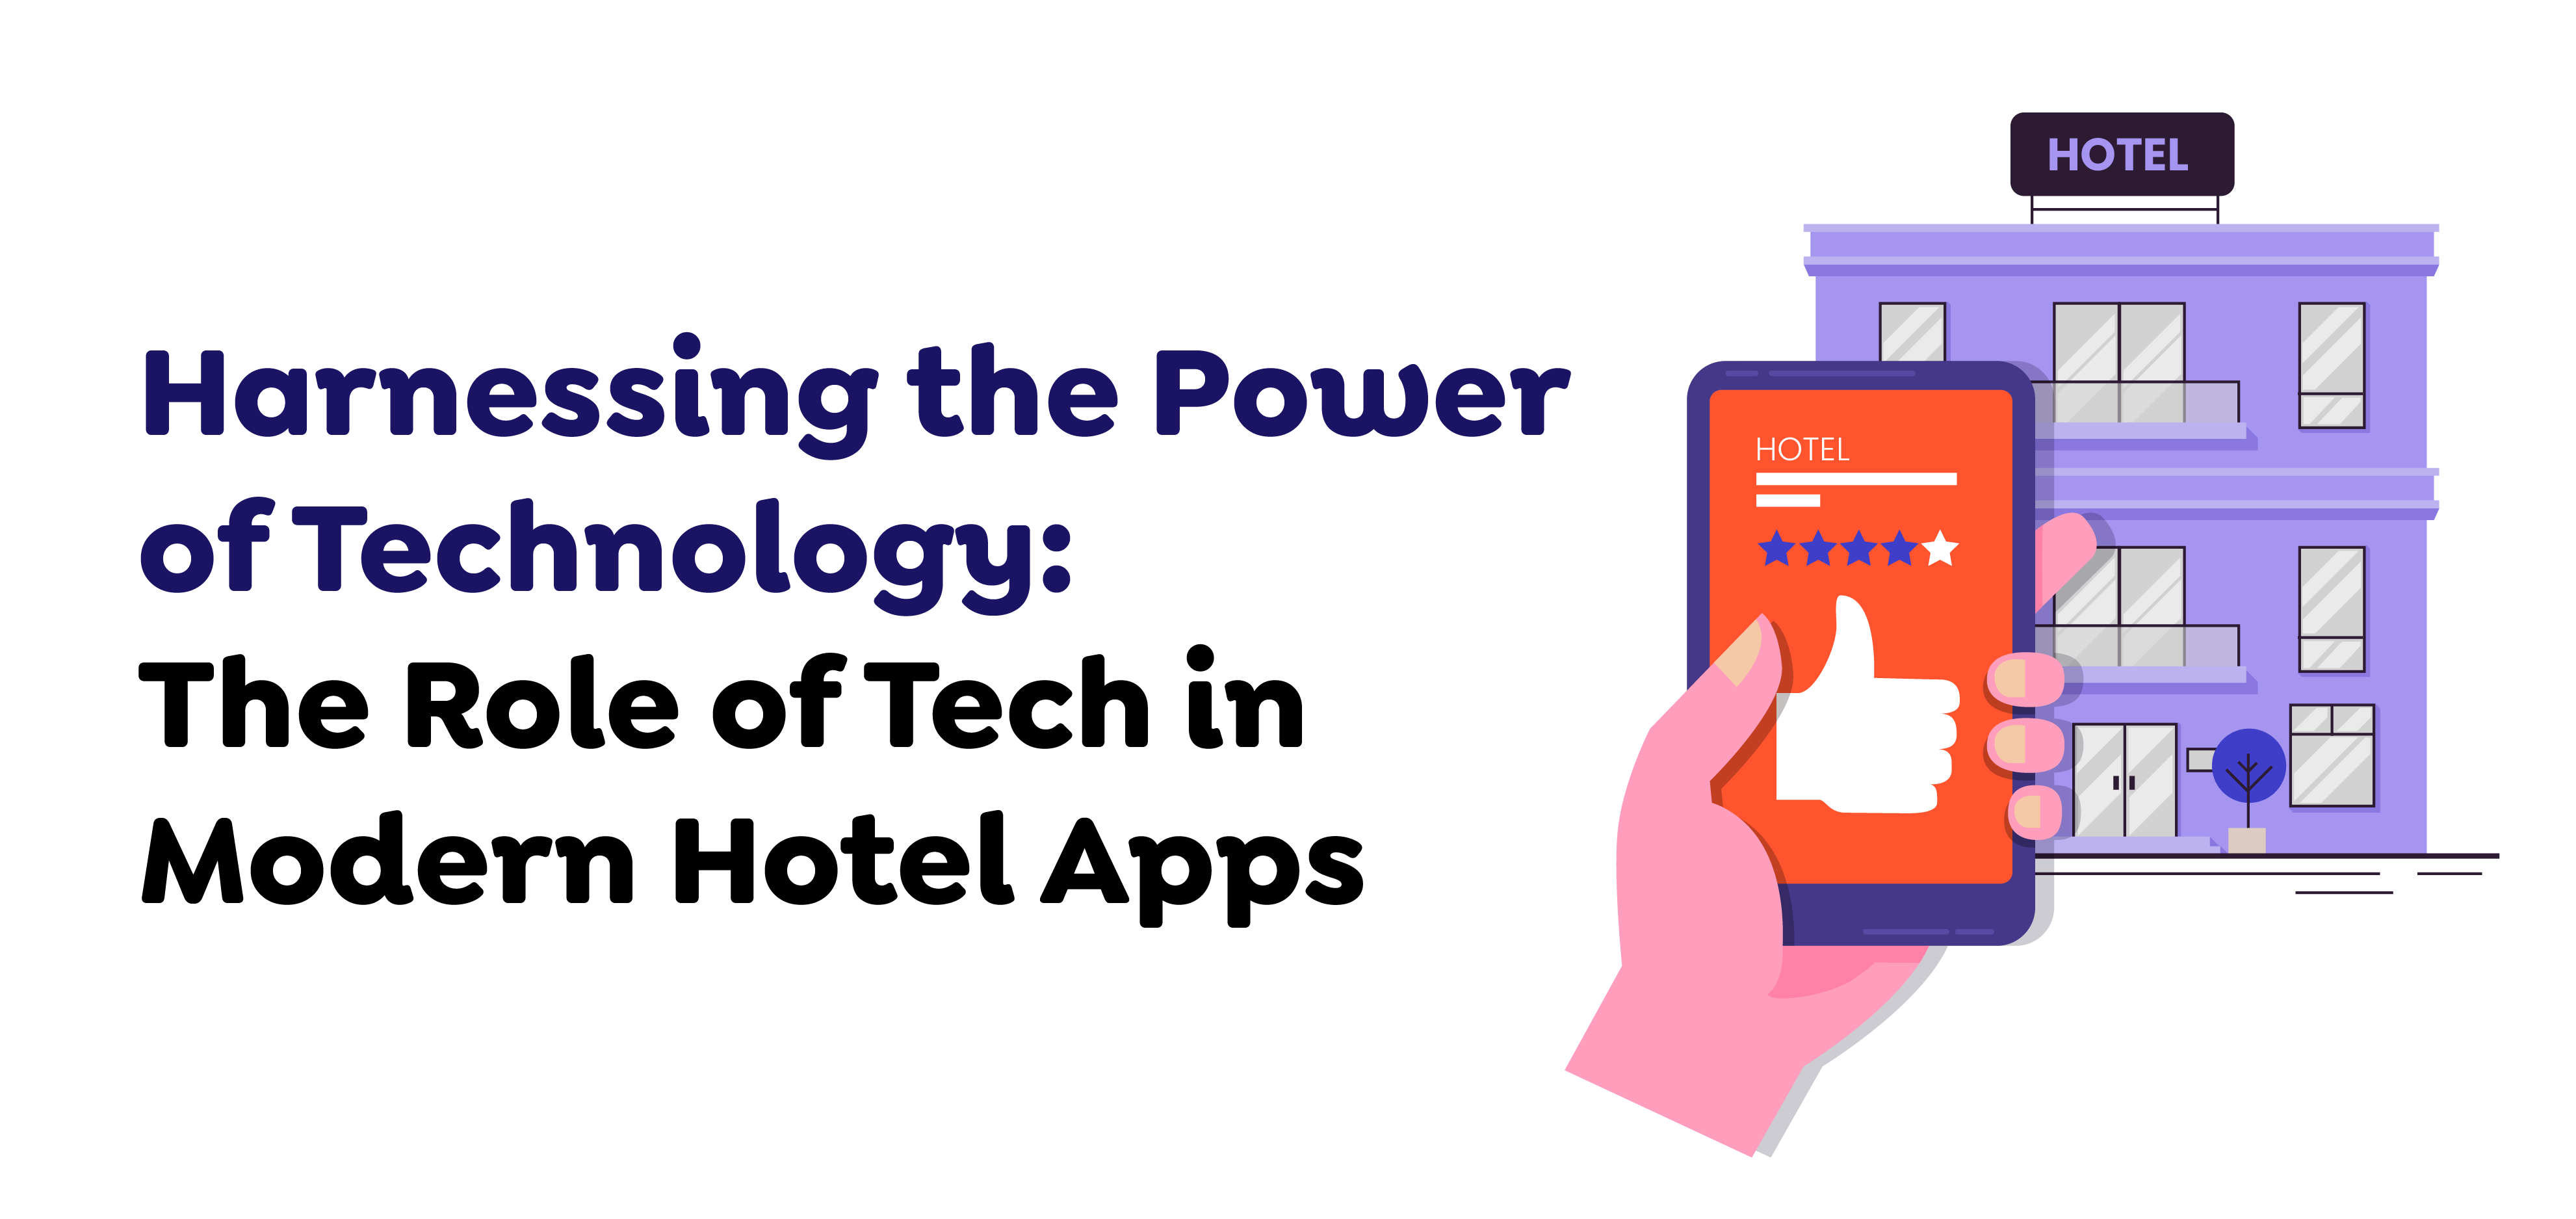 The Role of Tech in Modern Hotel Apps 